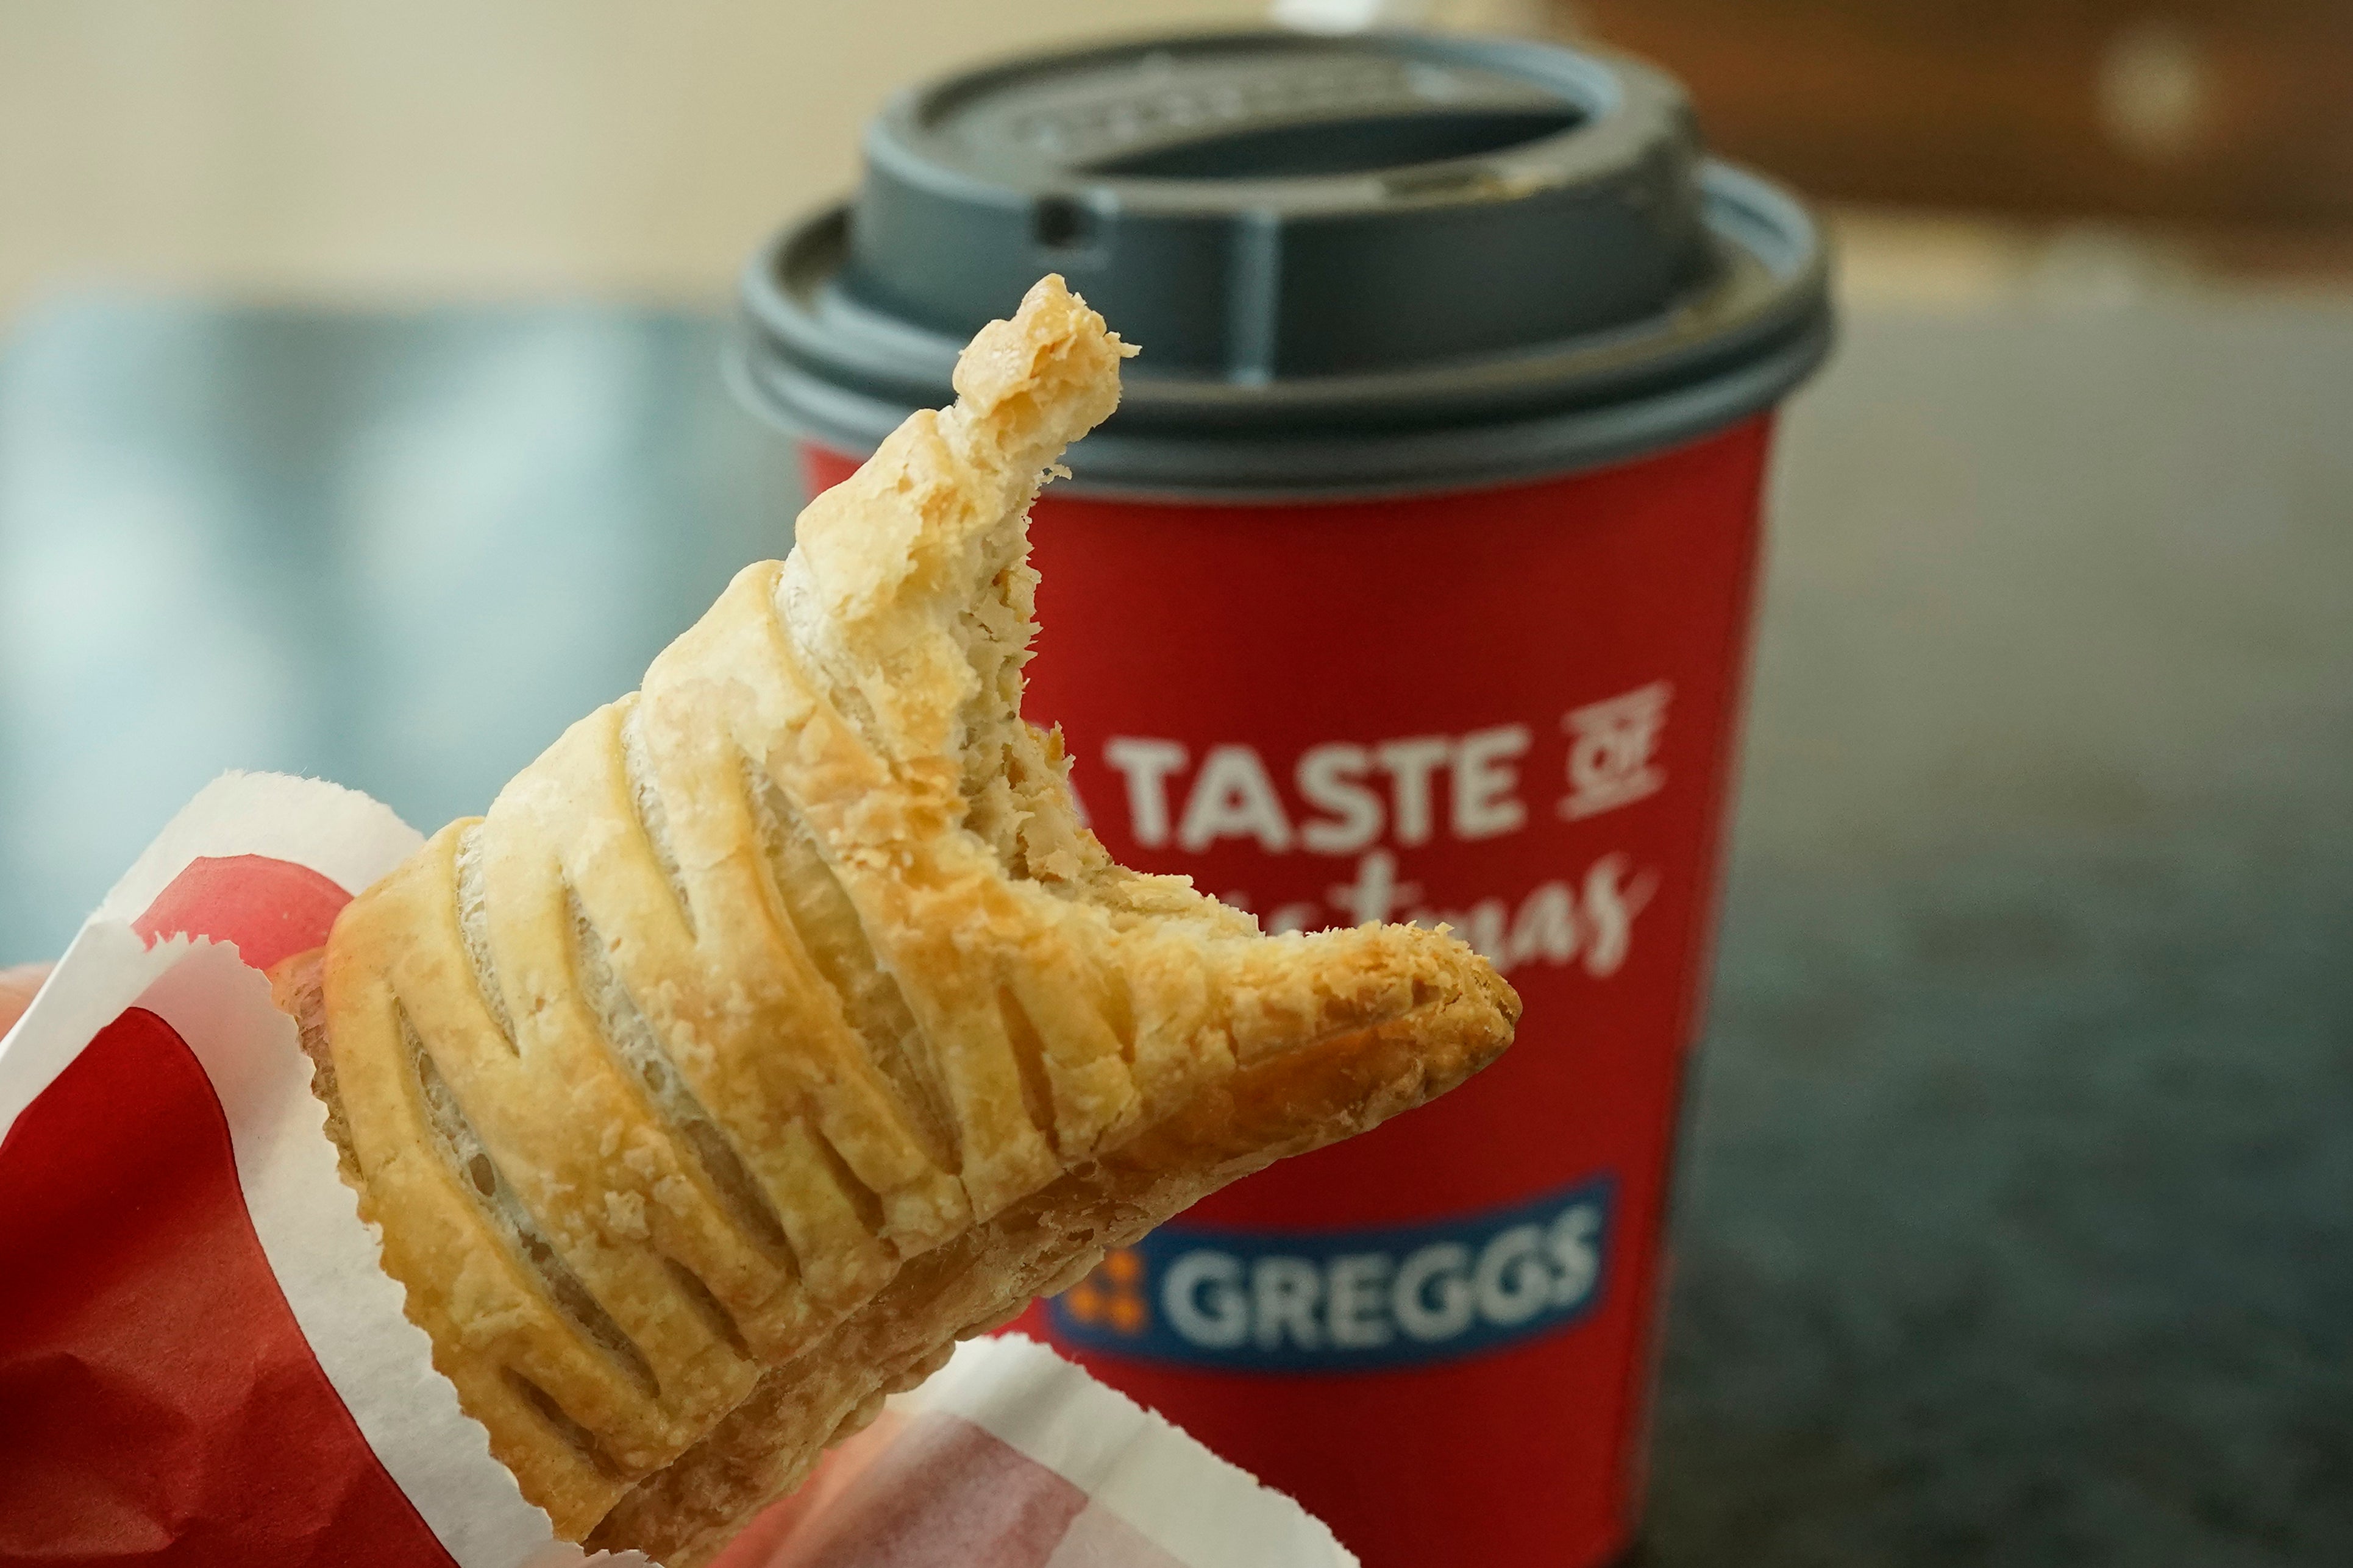 The vegan sausage roll was launched by Greggs in 2019